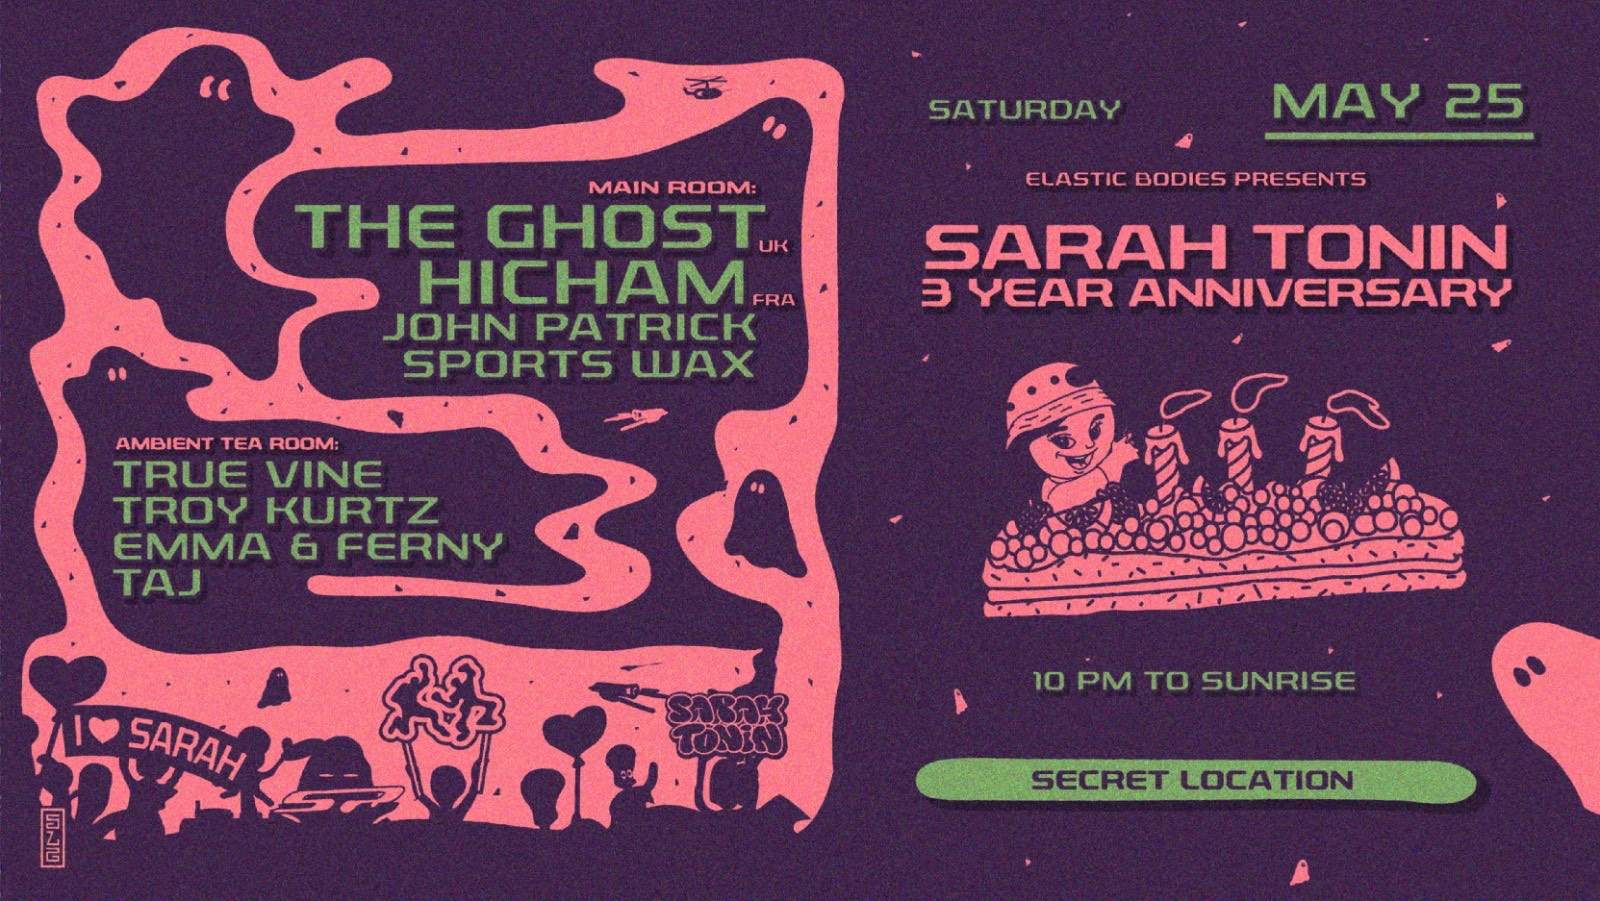 Sarah Tonin 3 Year Anniversary with The Ghost, Hicham & More - Página frontal